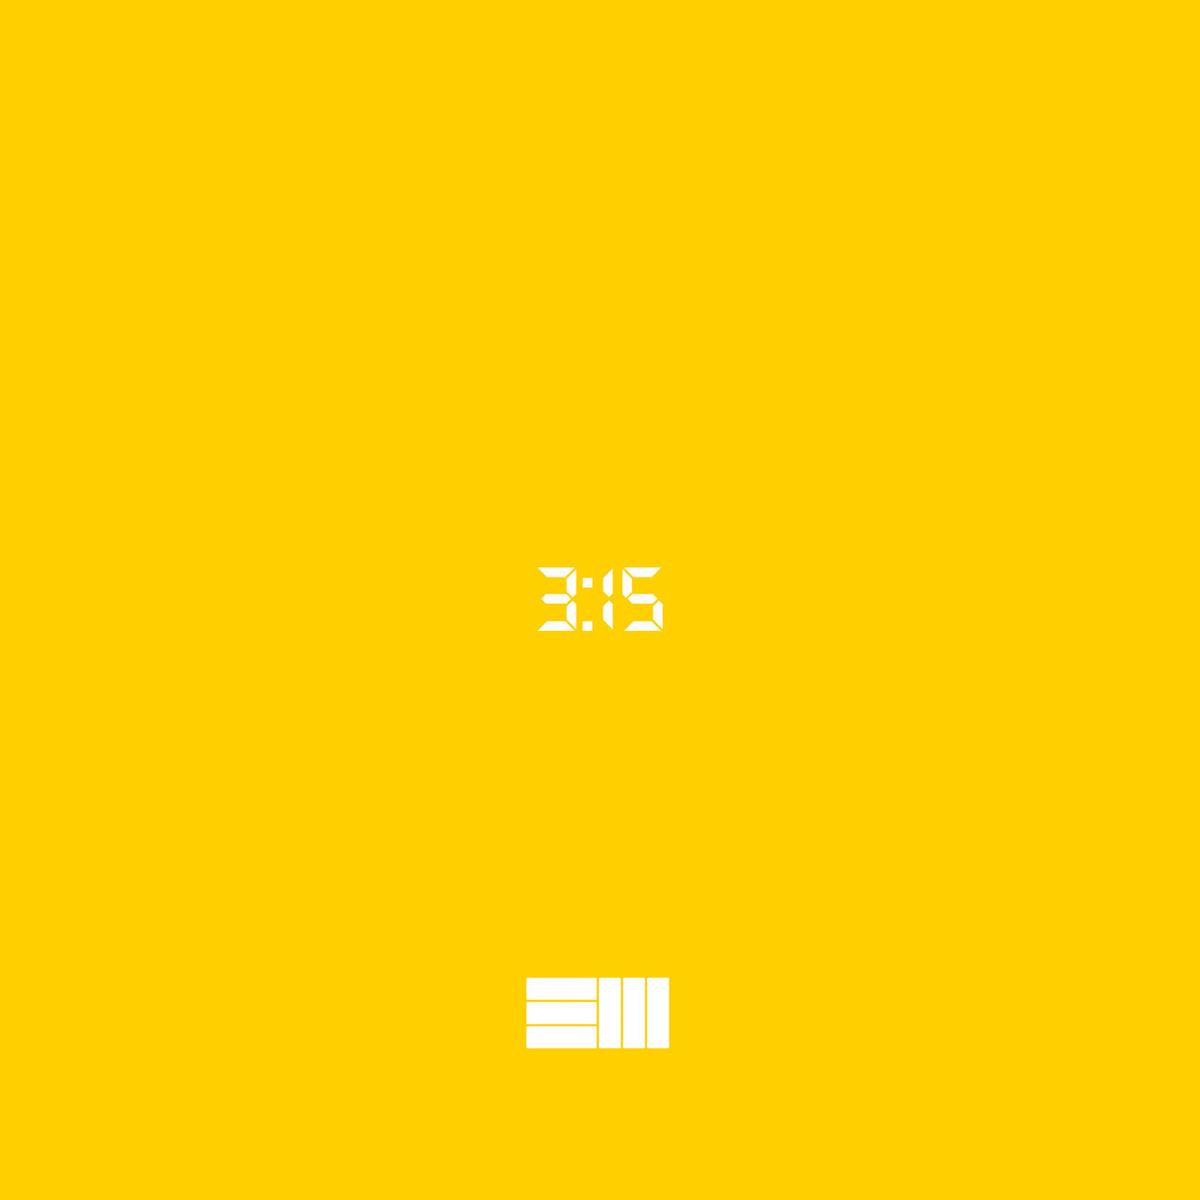 Russ Spills His Heart Out To His Chick In “3:15 (Breathe)”